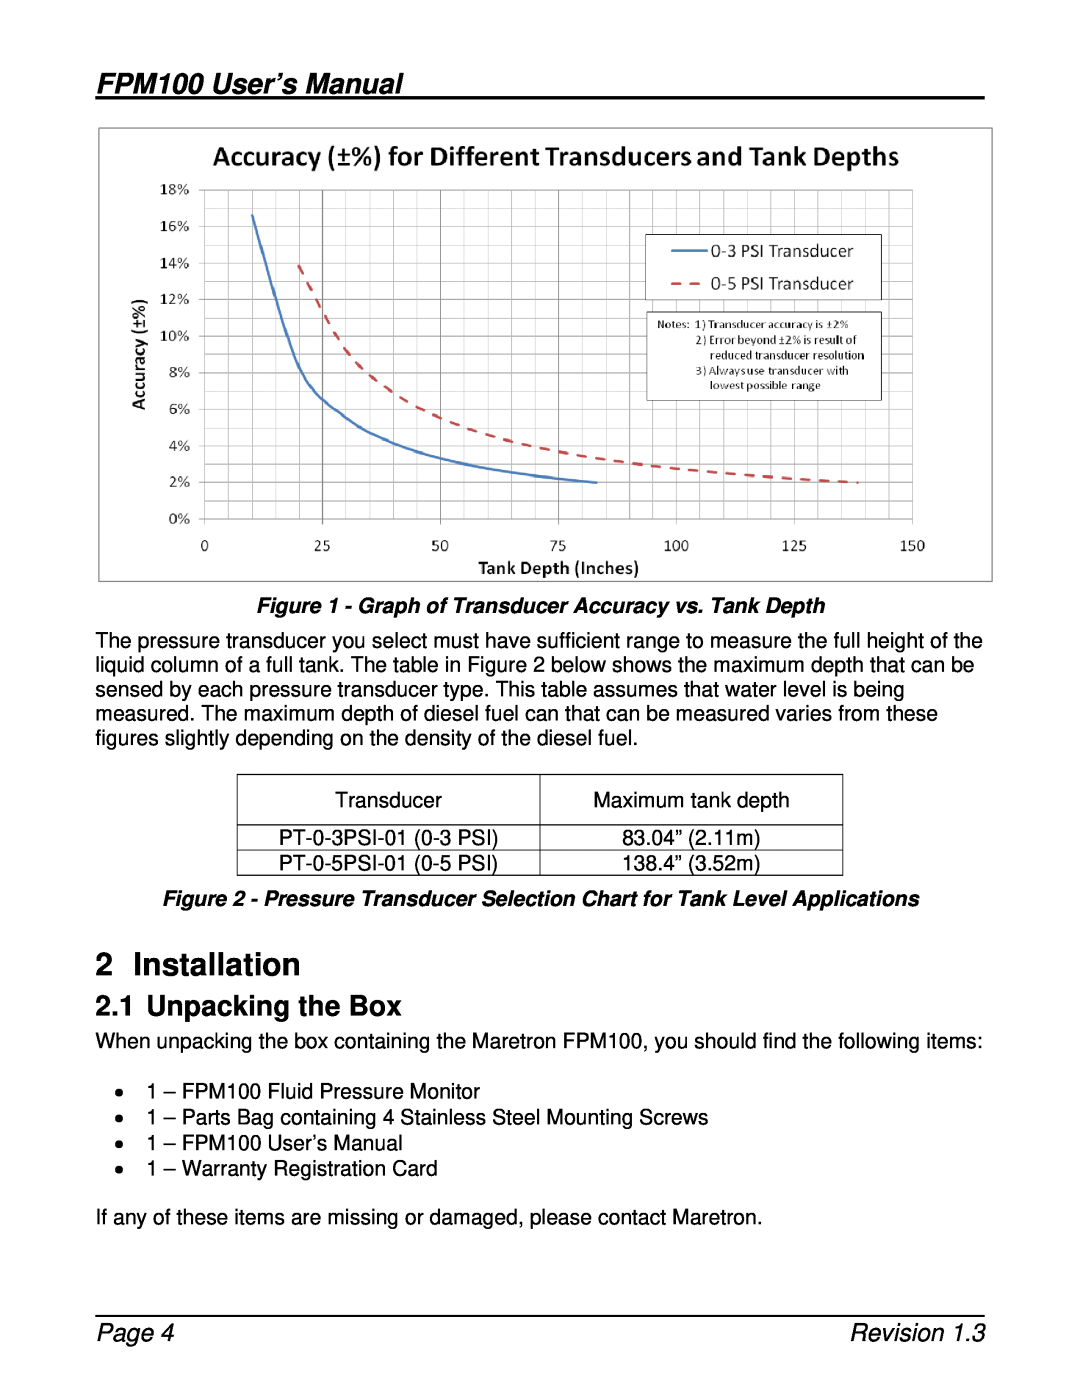 Maretron Installation, Unpacking the Box, Graph of Transducer Accuracy vs. Tank Depth, FPM100 User’s Manual, Page 